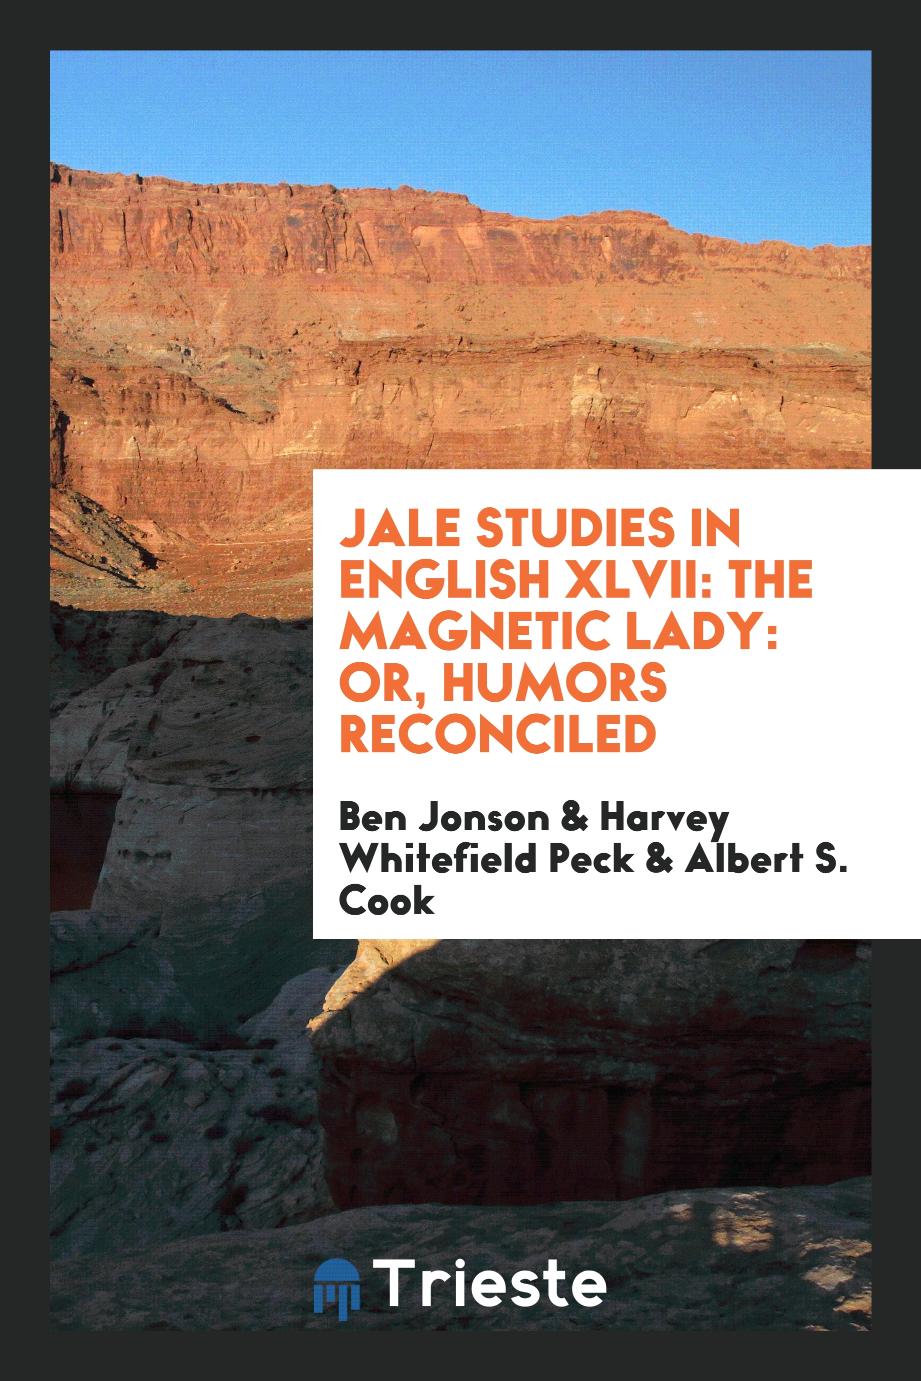 Jale Studies in English XLVII: The Magnetic Lady: Or, Humors Reconciled